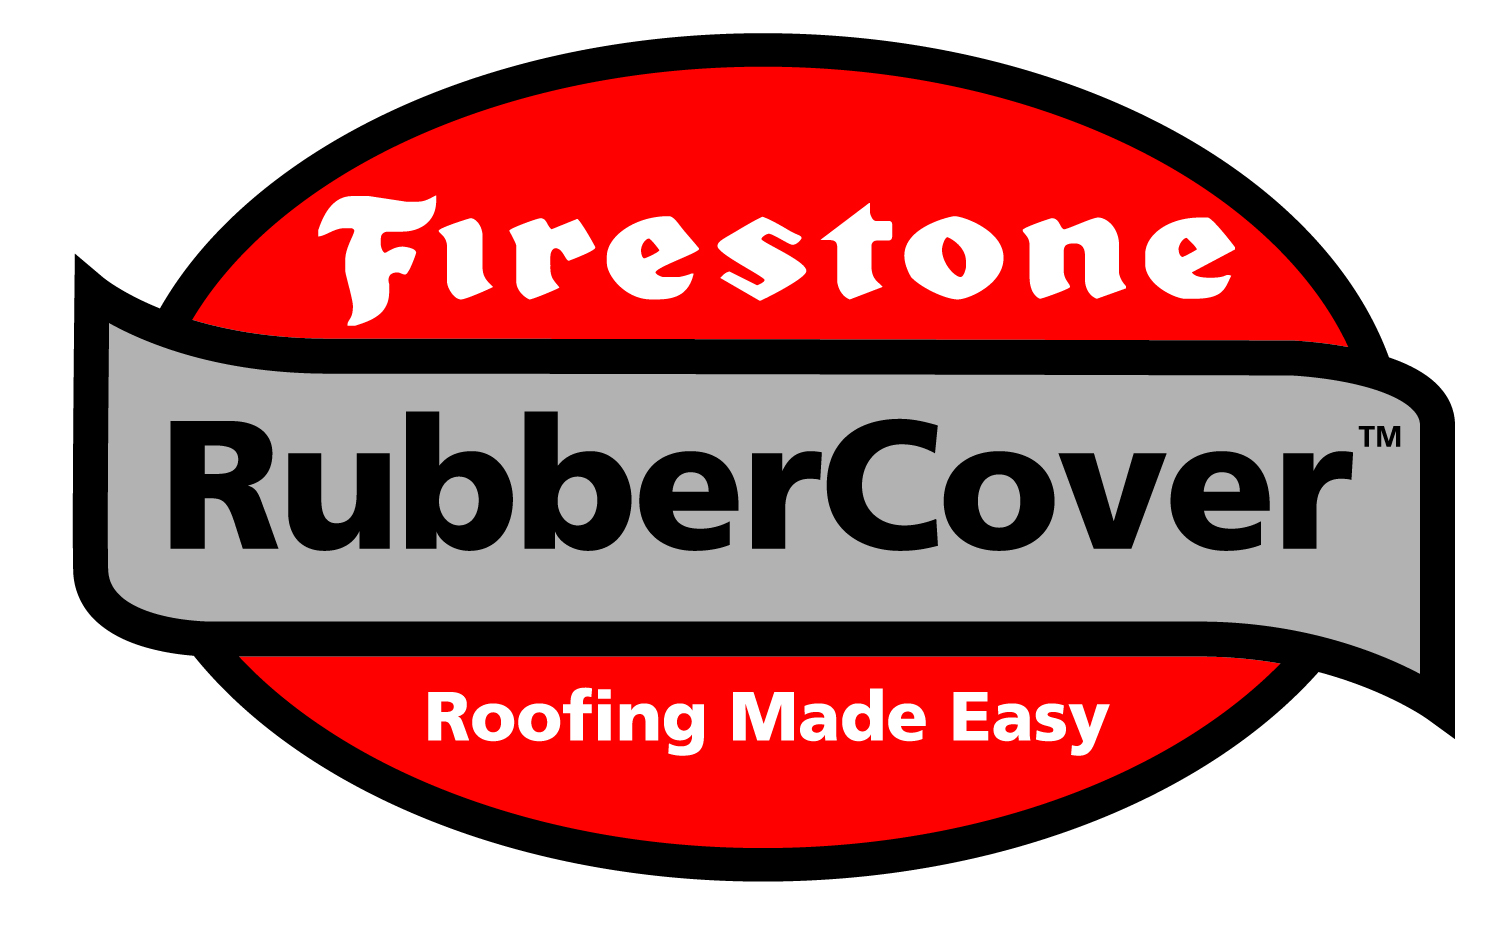 troon Extractie revolutie Reasons to Use EPDM Firestone Rubber Roofing | Atlantic Cladding